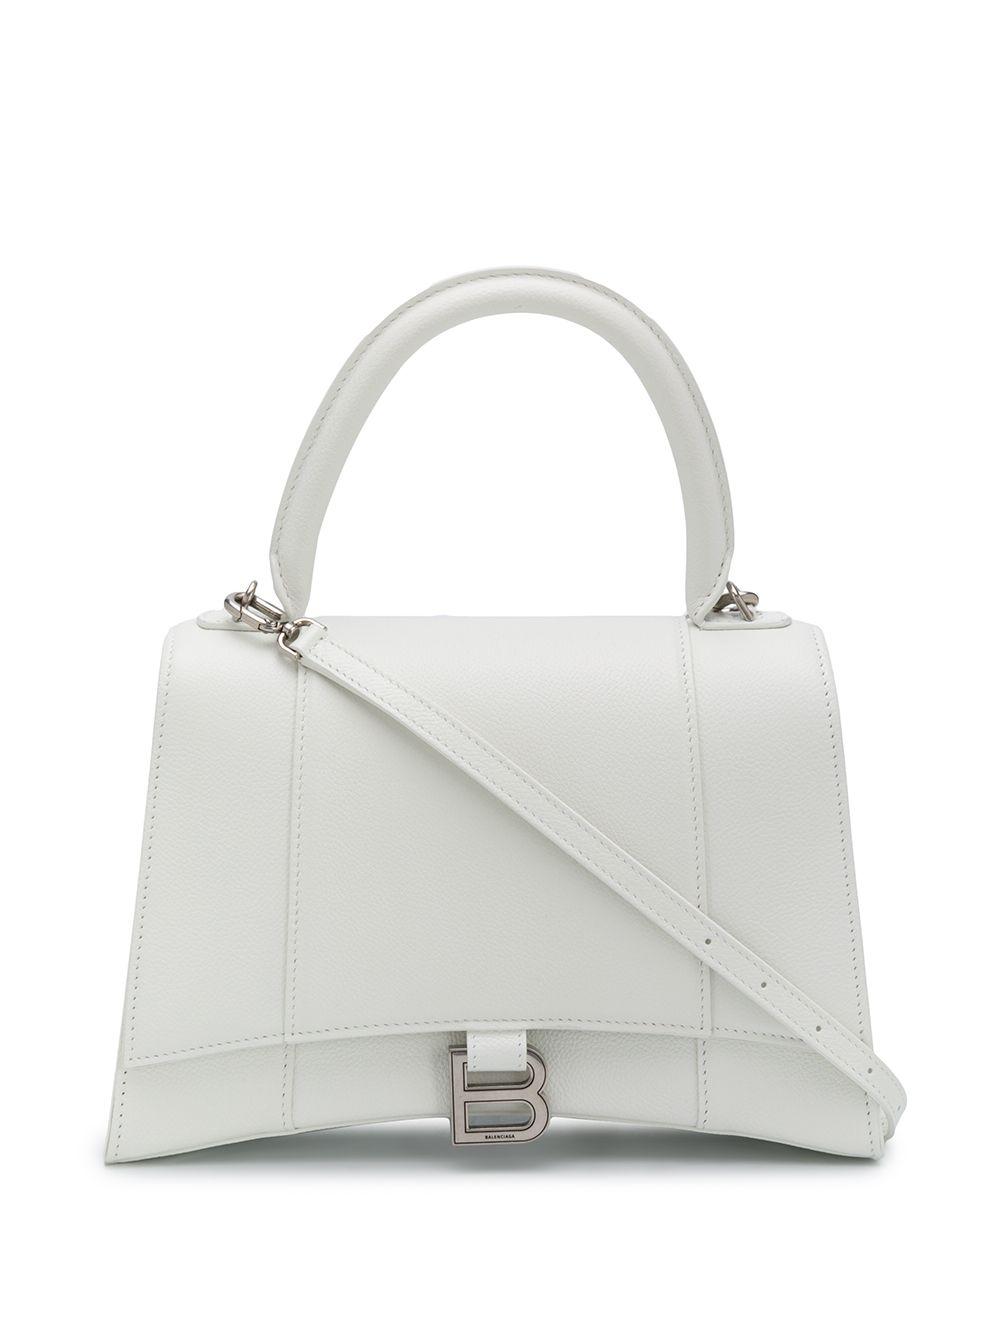 Balenciaga Hourglass Leather Bag in White - Lyst